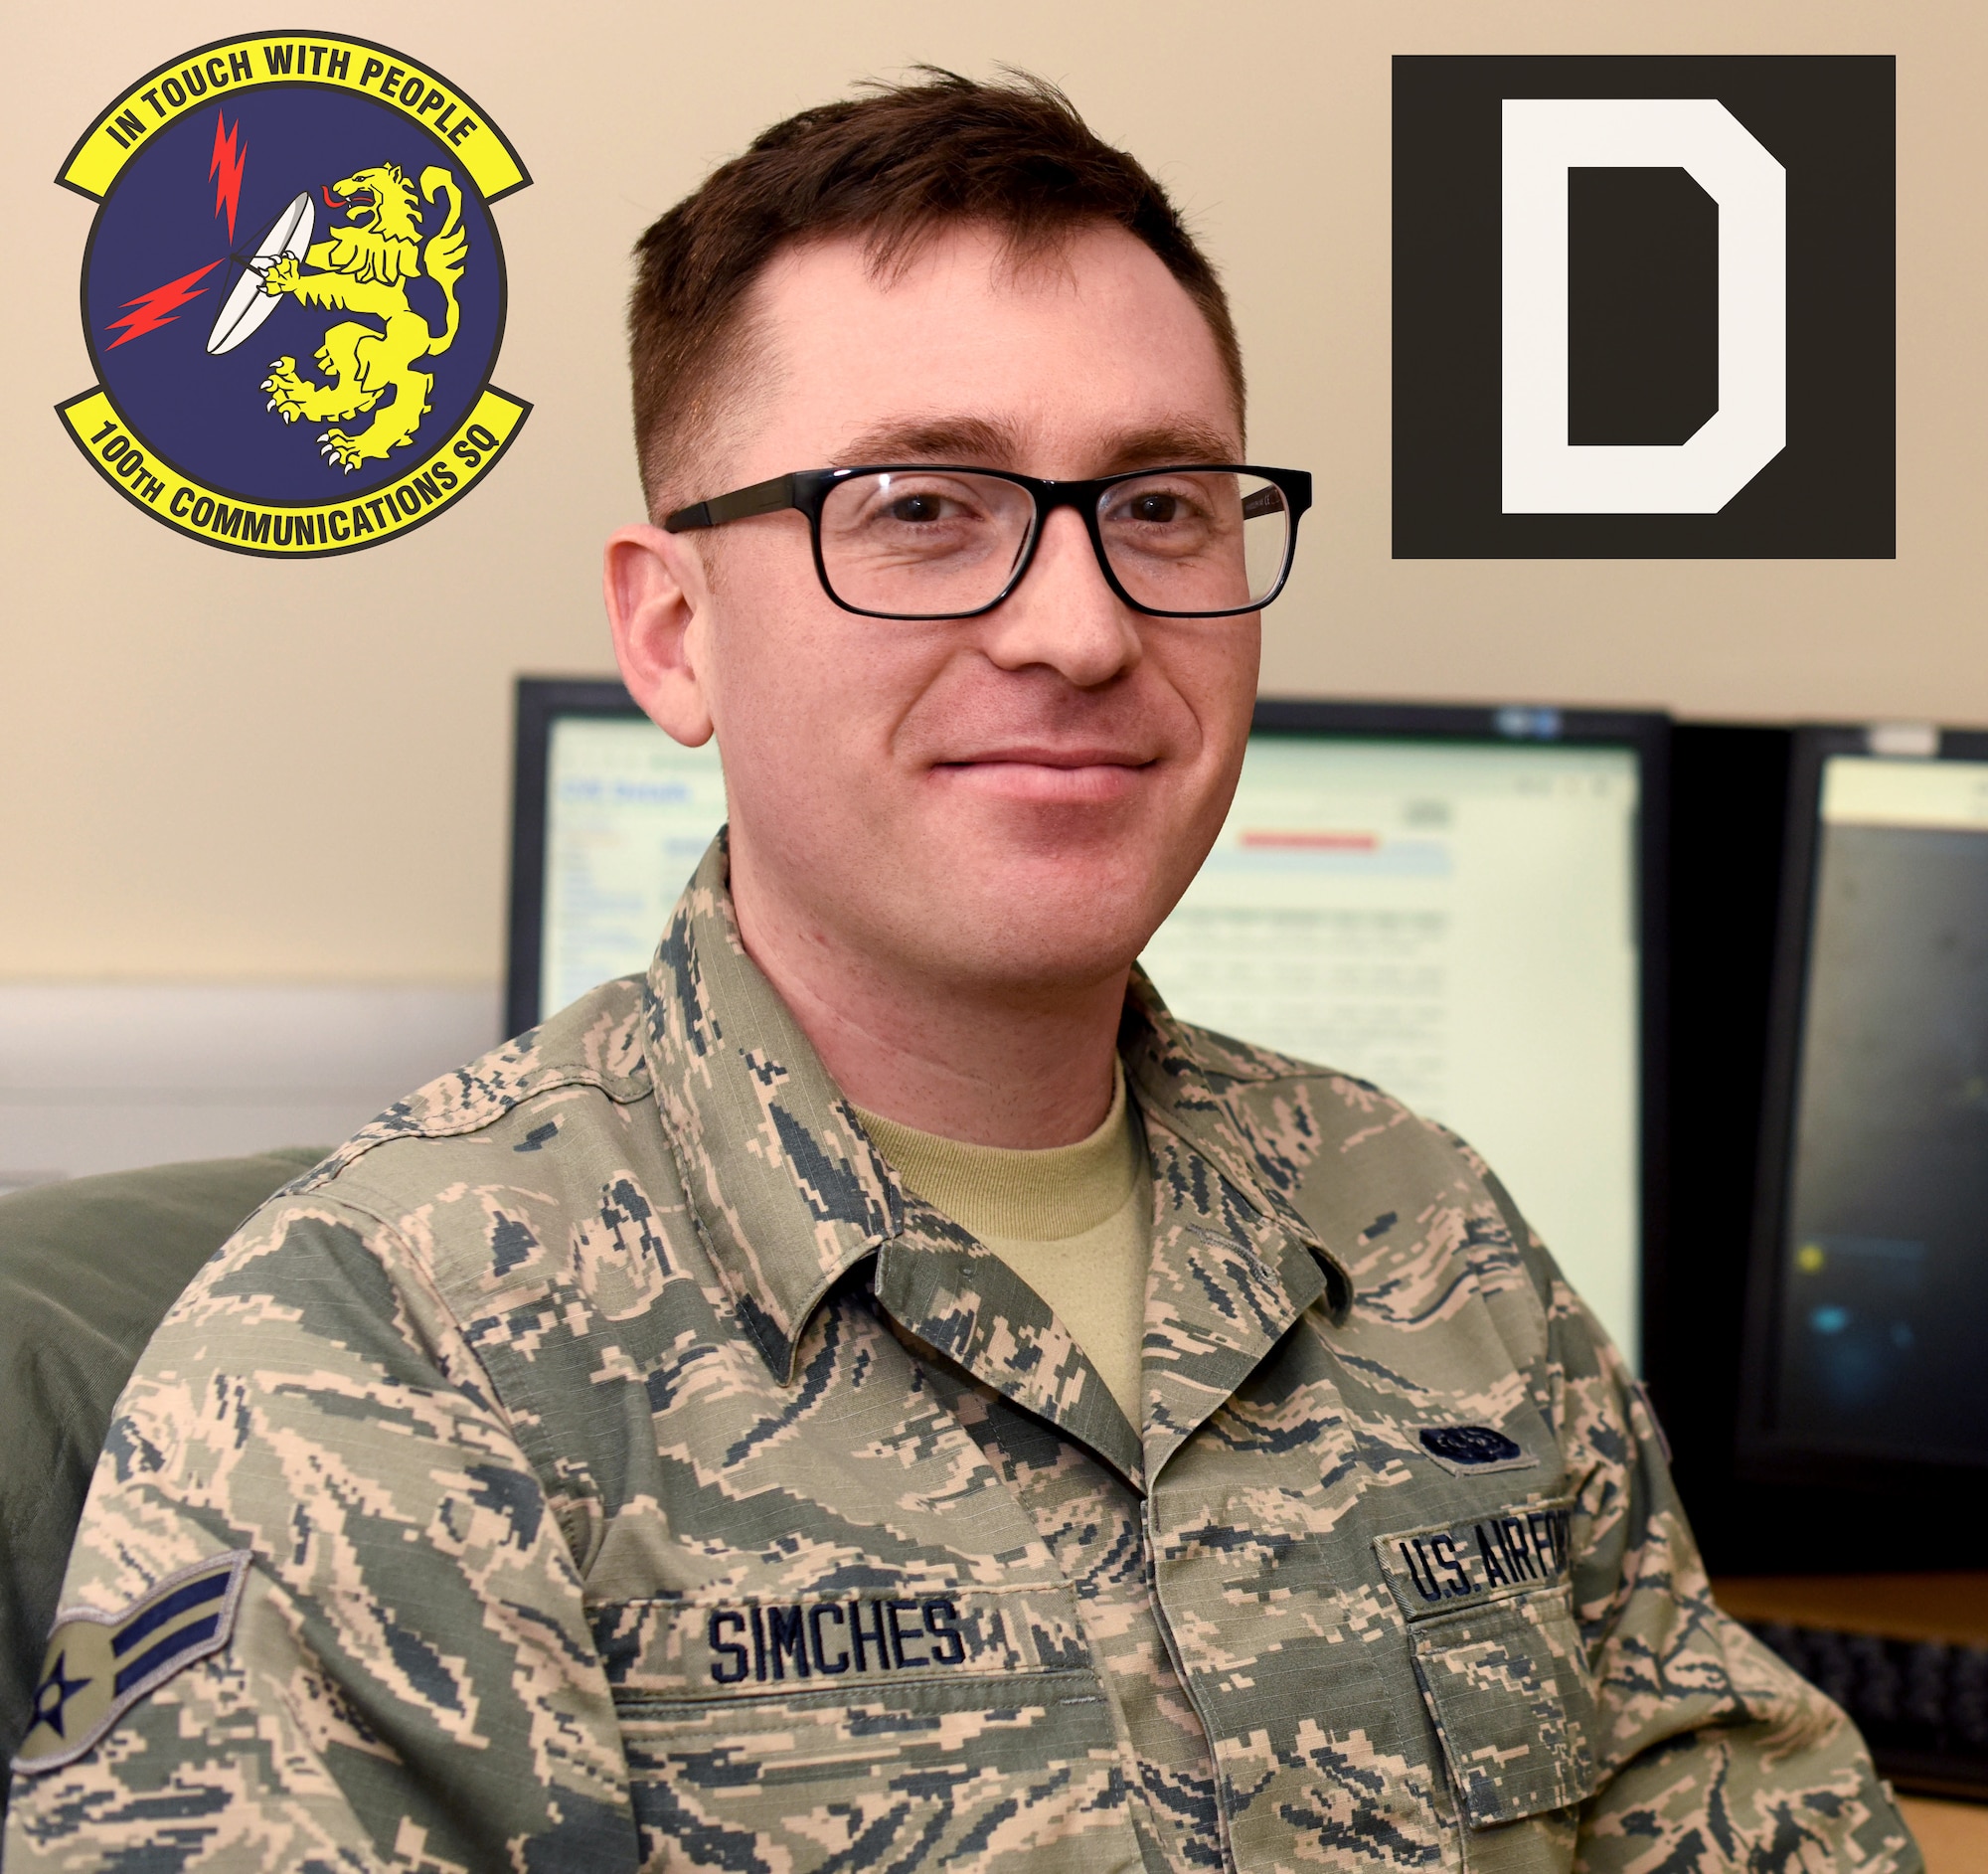 Airman 1st Class Gabriel Simches, 100th Communications Squadron cyber defense operator, is working towards utilizing mobile device management software on Air Force issued mobile devices to increase security, reduce risk of data compromise and reduce man hours within the squadron. (U.S. Air Force photo illustration by Senior Airman Brandon Esau)